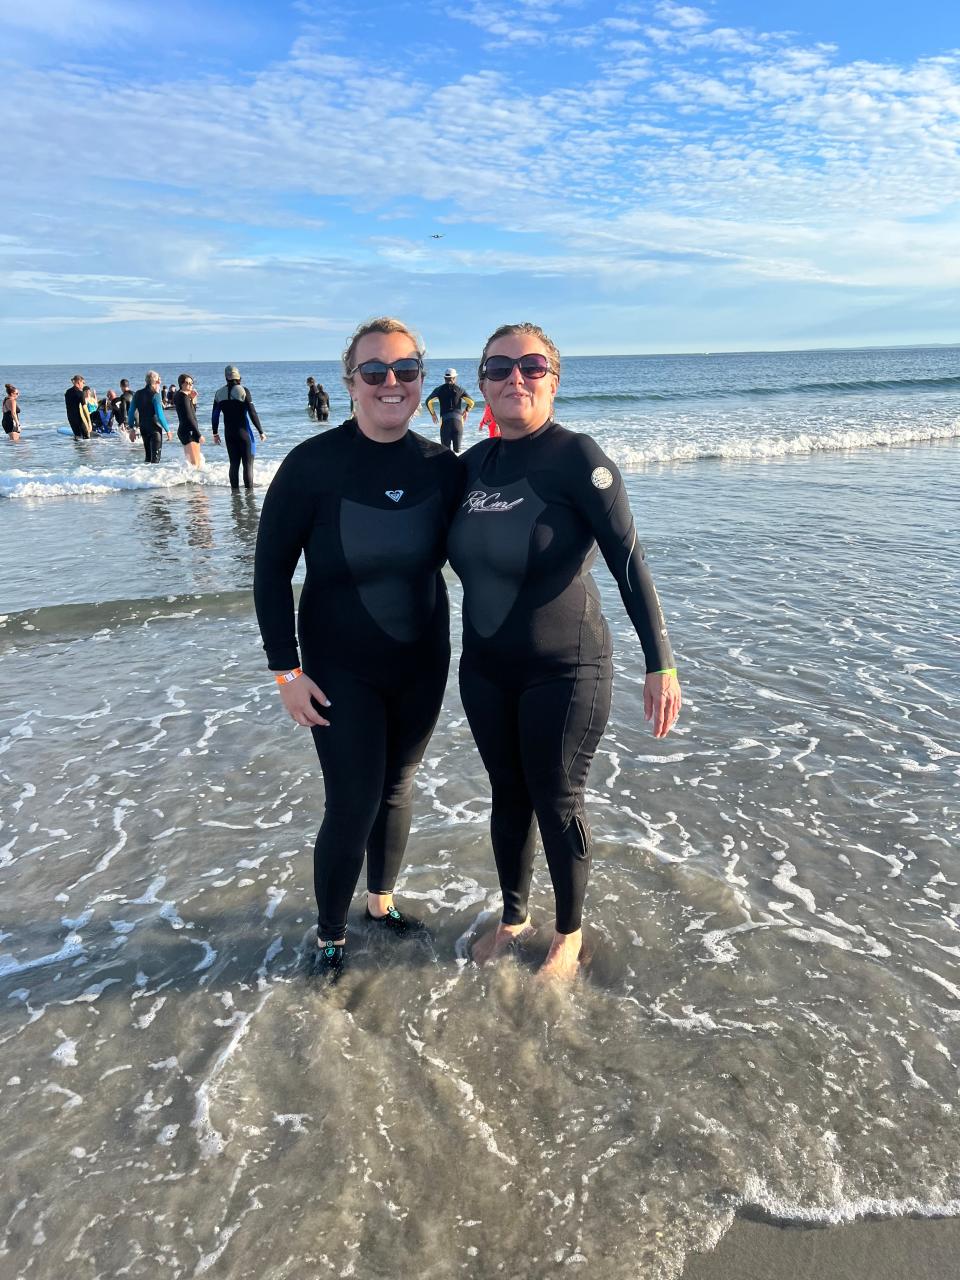 Kennebunk Savings’ employees Jess Owens and Nancy Caron volunteer at a Special Surfers event.